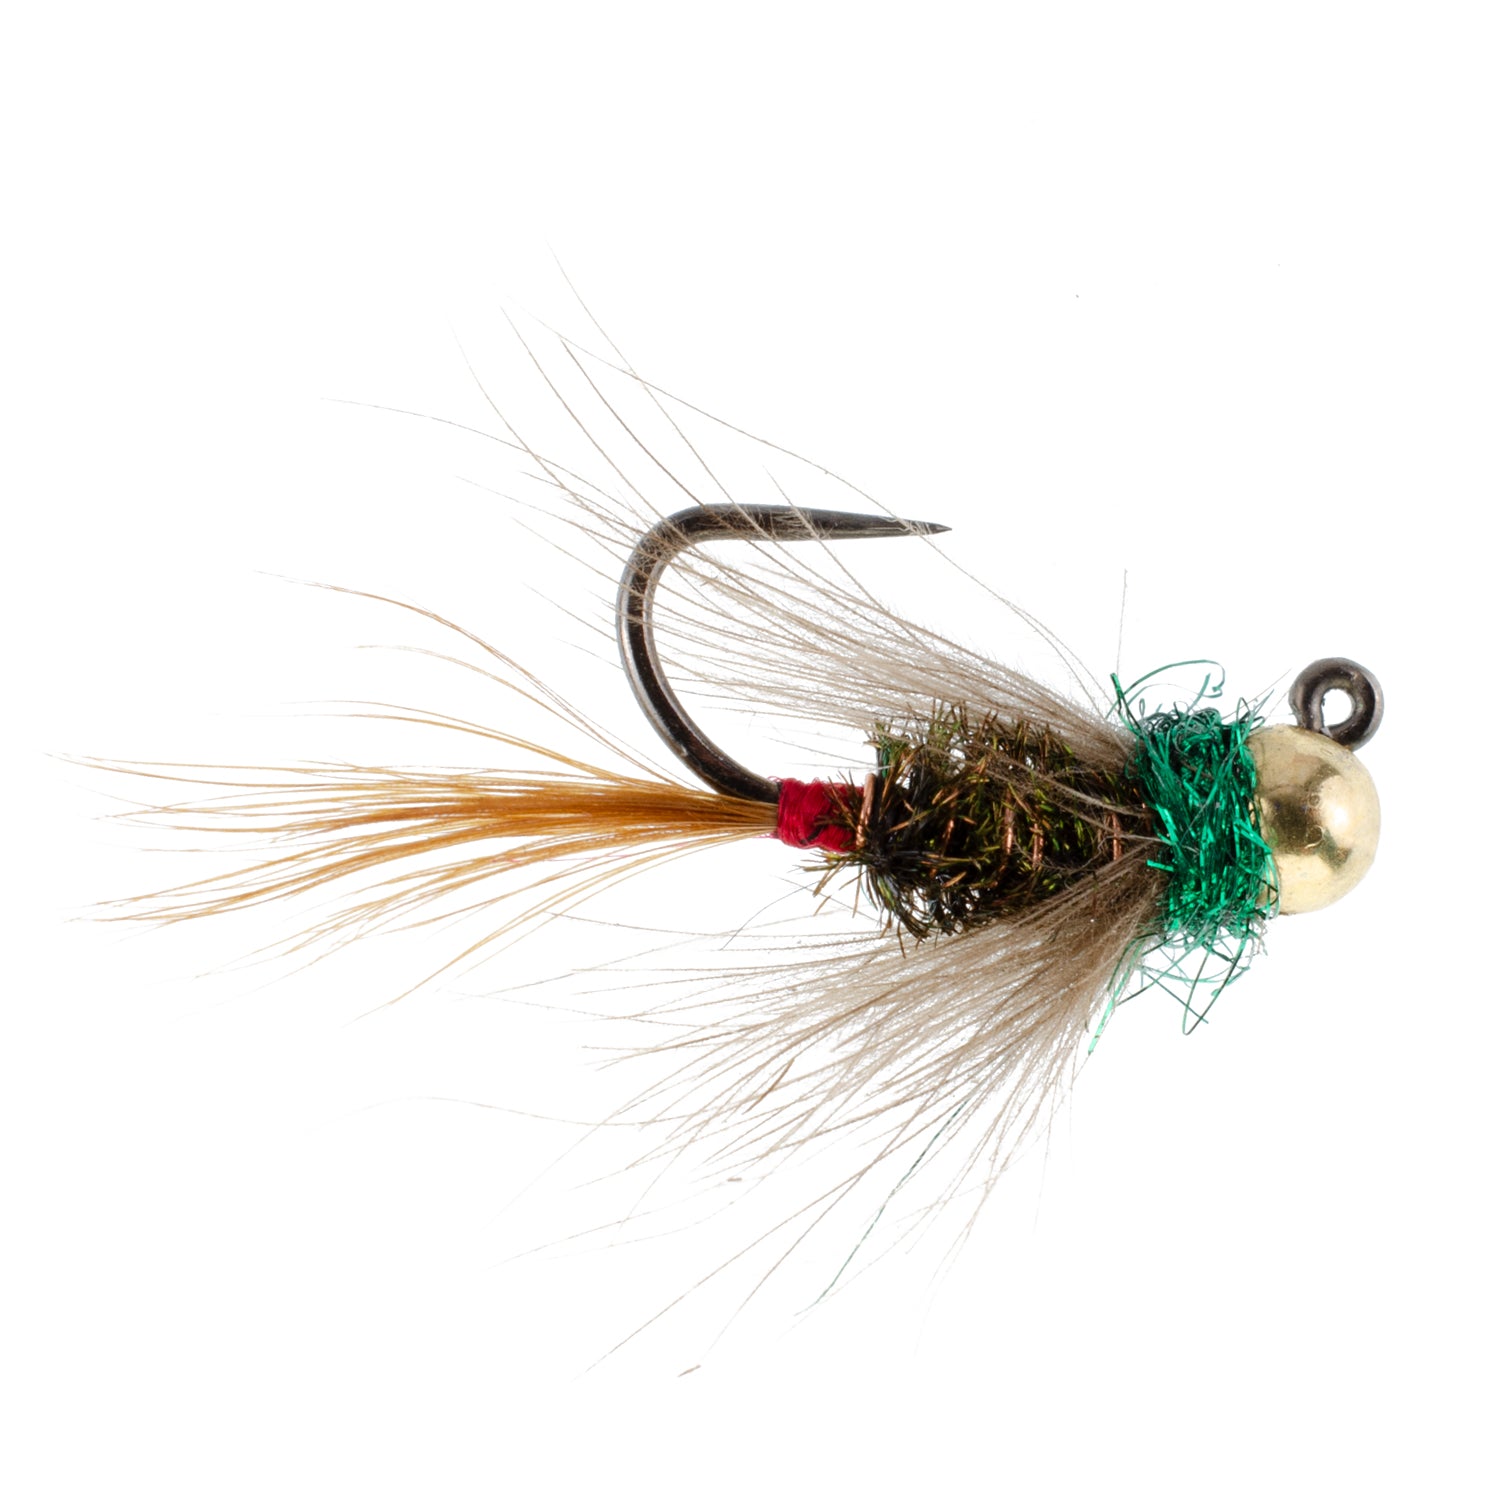 Tungsten Bead Tactical CDC Frenchie Czech Nymph Euro Nymphing Fly - 6 Flies Size 12